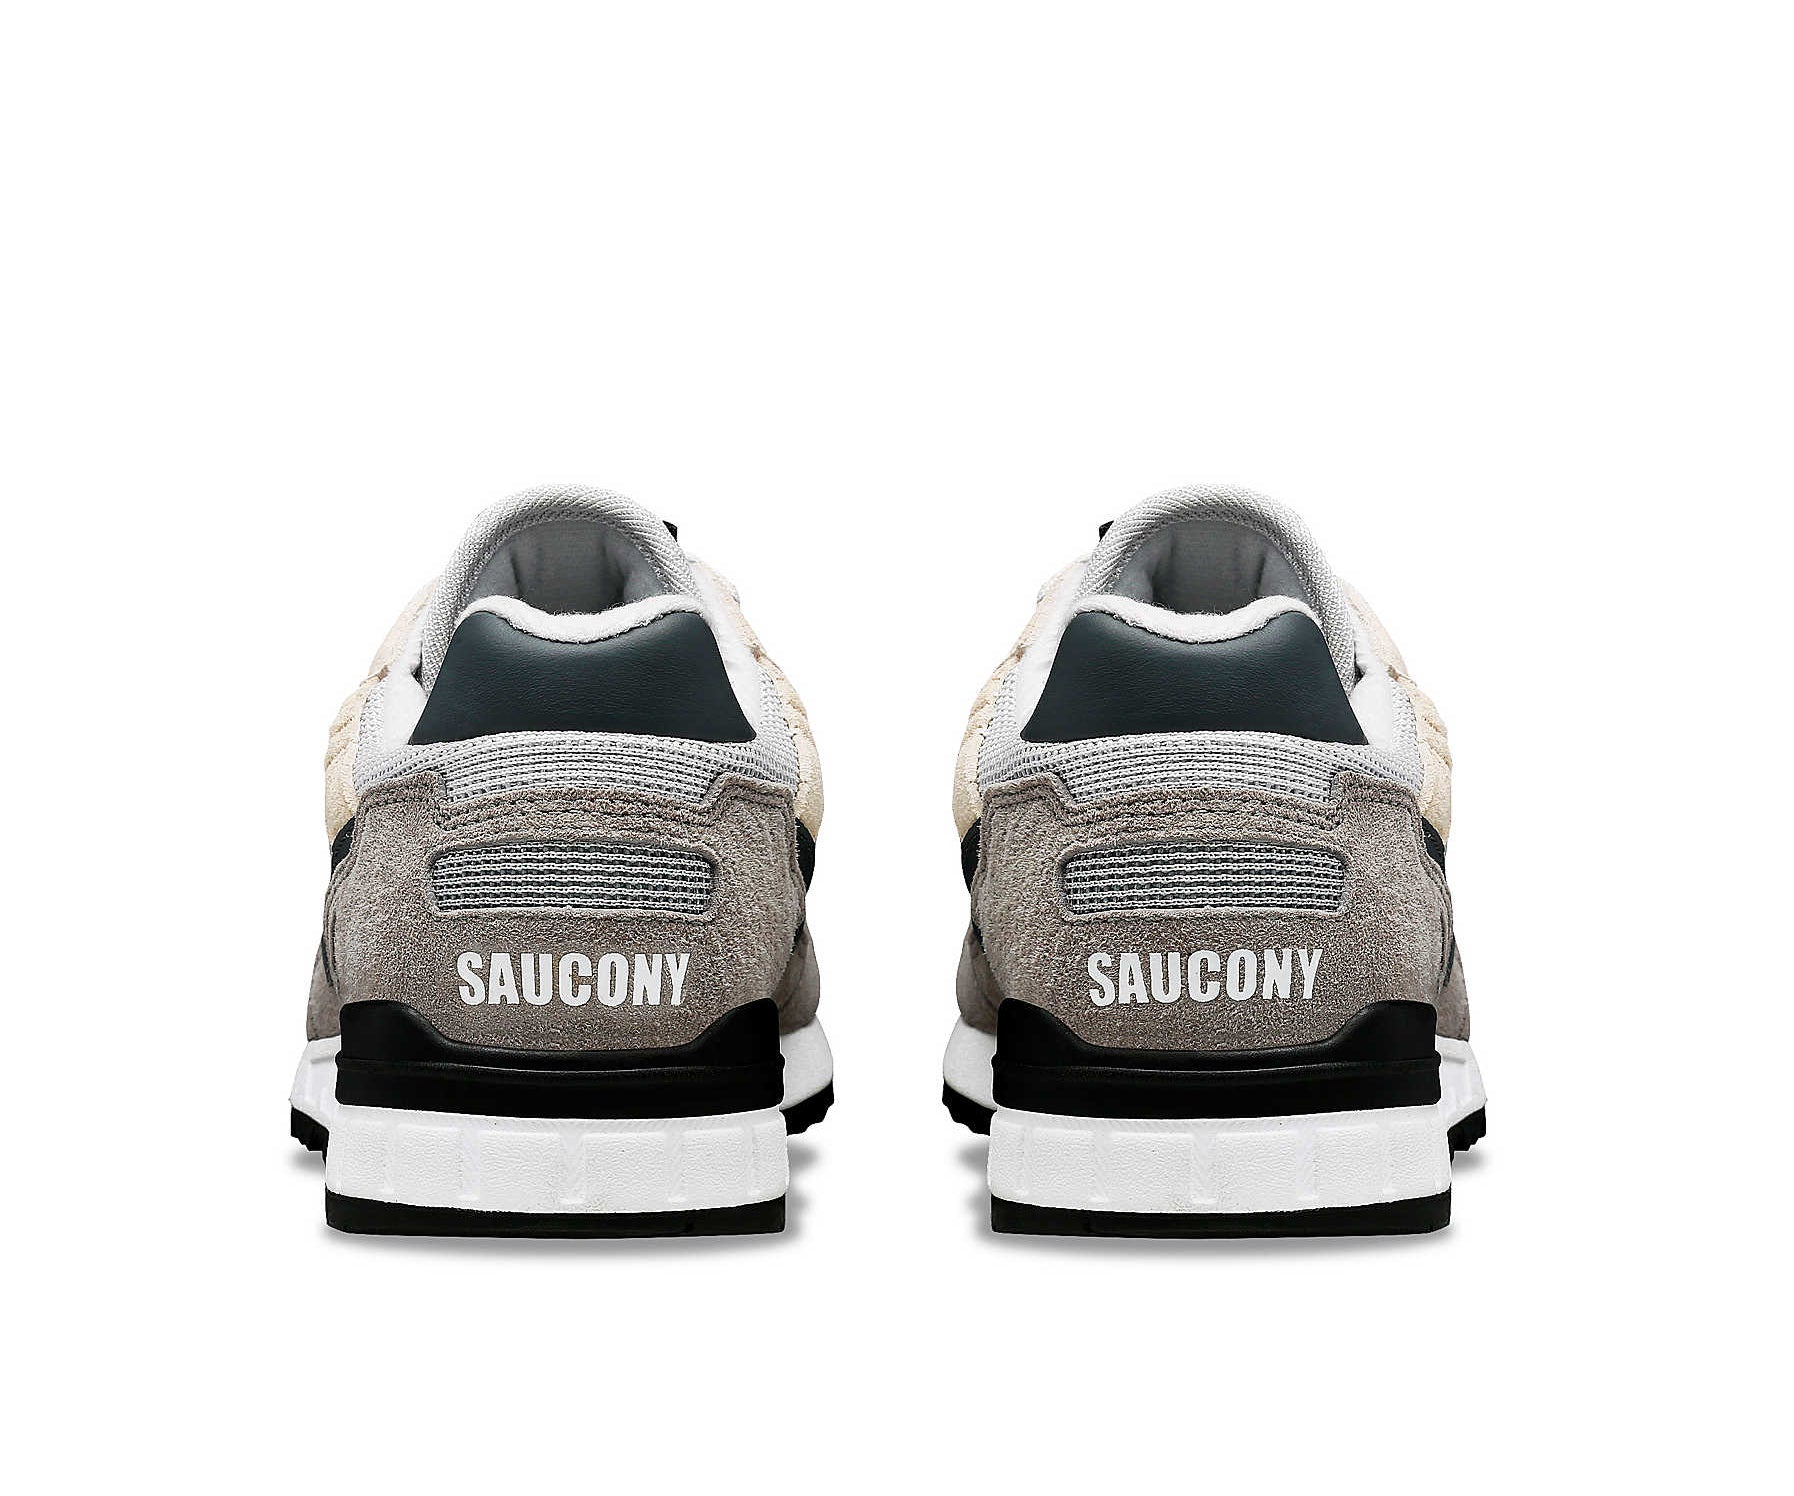 A gray and white running shoe from Saucony.